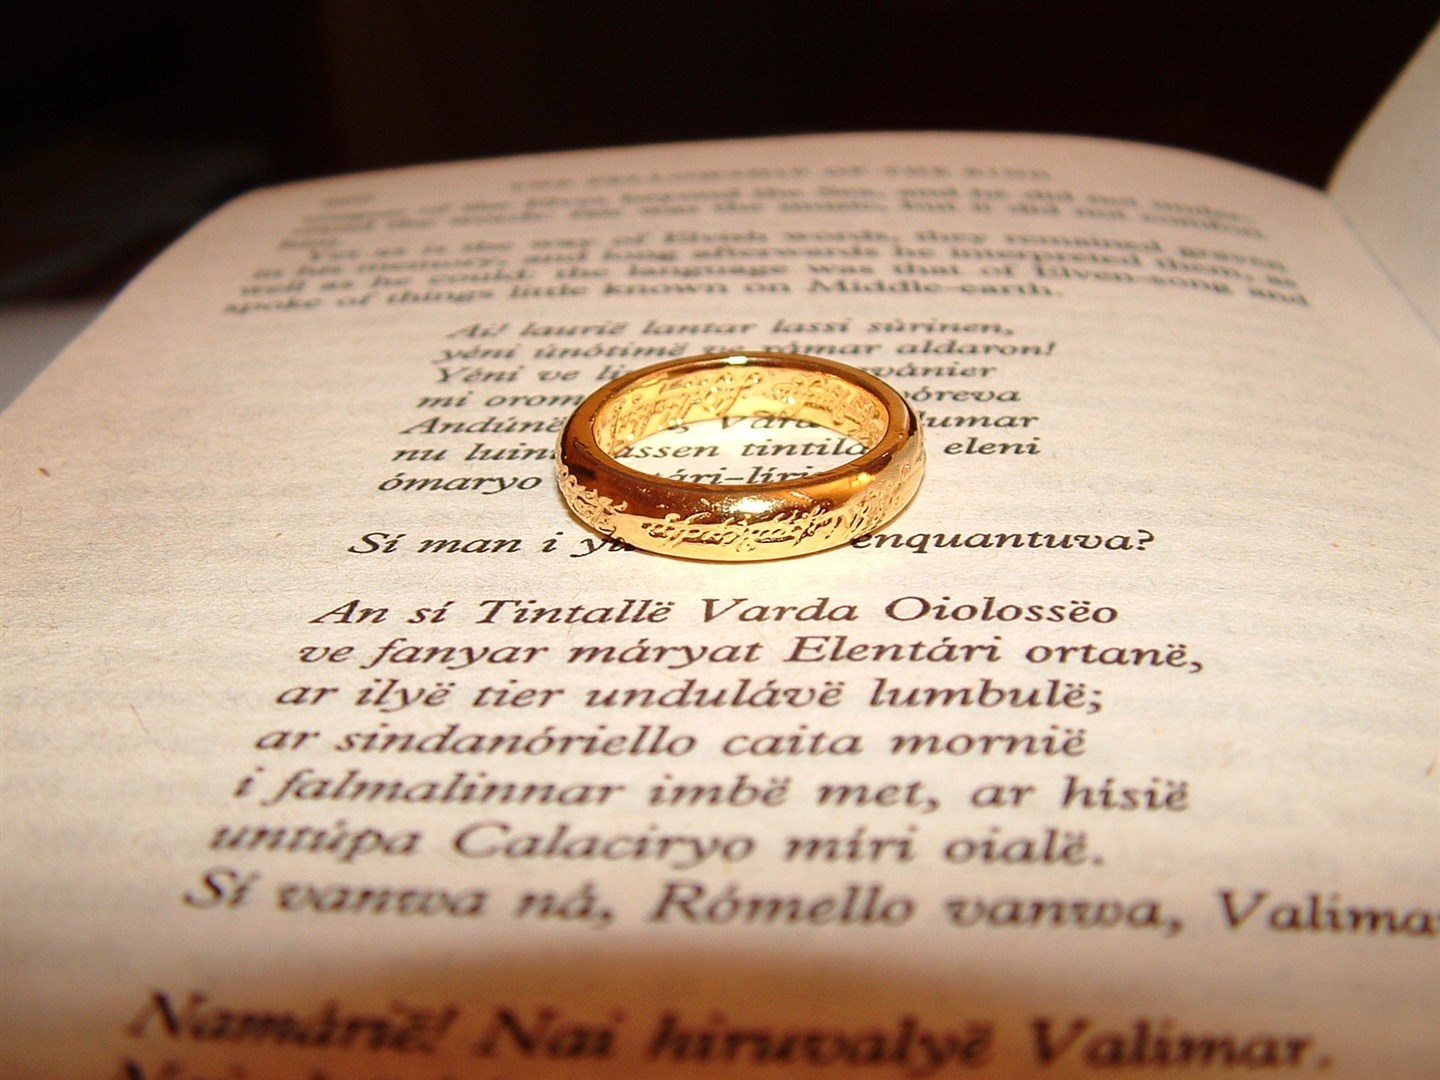 A page from Lord of the Rings. Picture: Zanastardust, CC BY 2.0 <https://creativecommons.org/licenses/by/2.0>, via Wikimedia Commons.